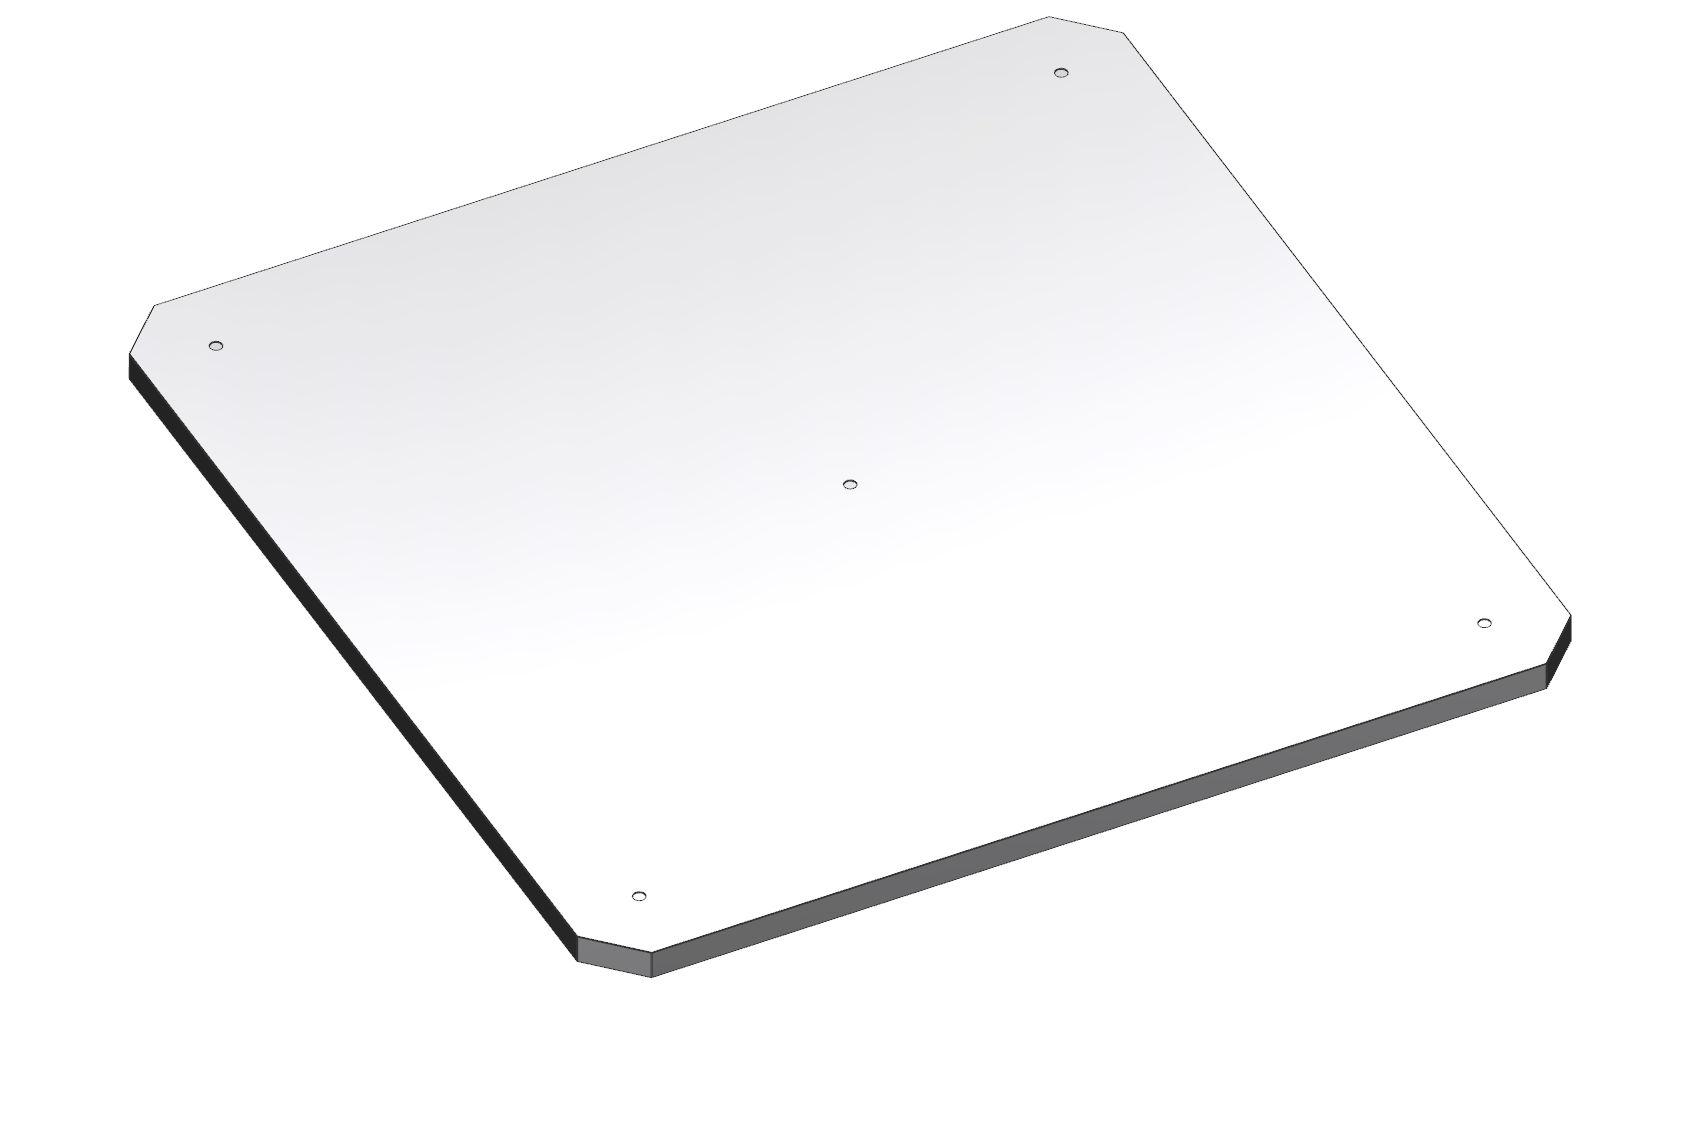 Blank of an Innoclicker clamping plate